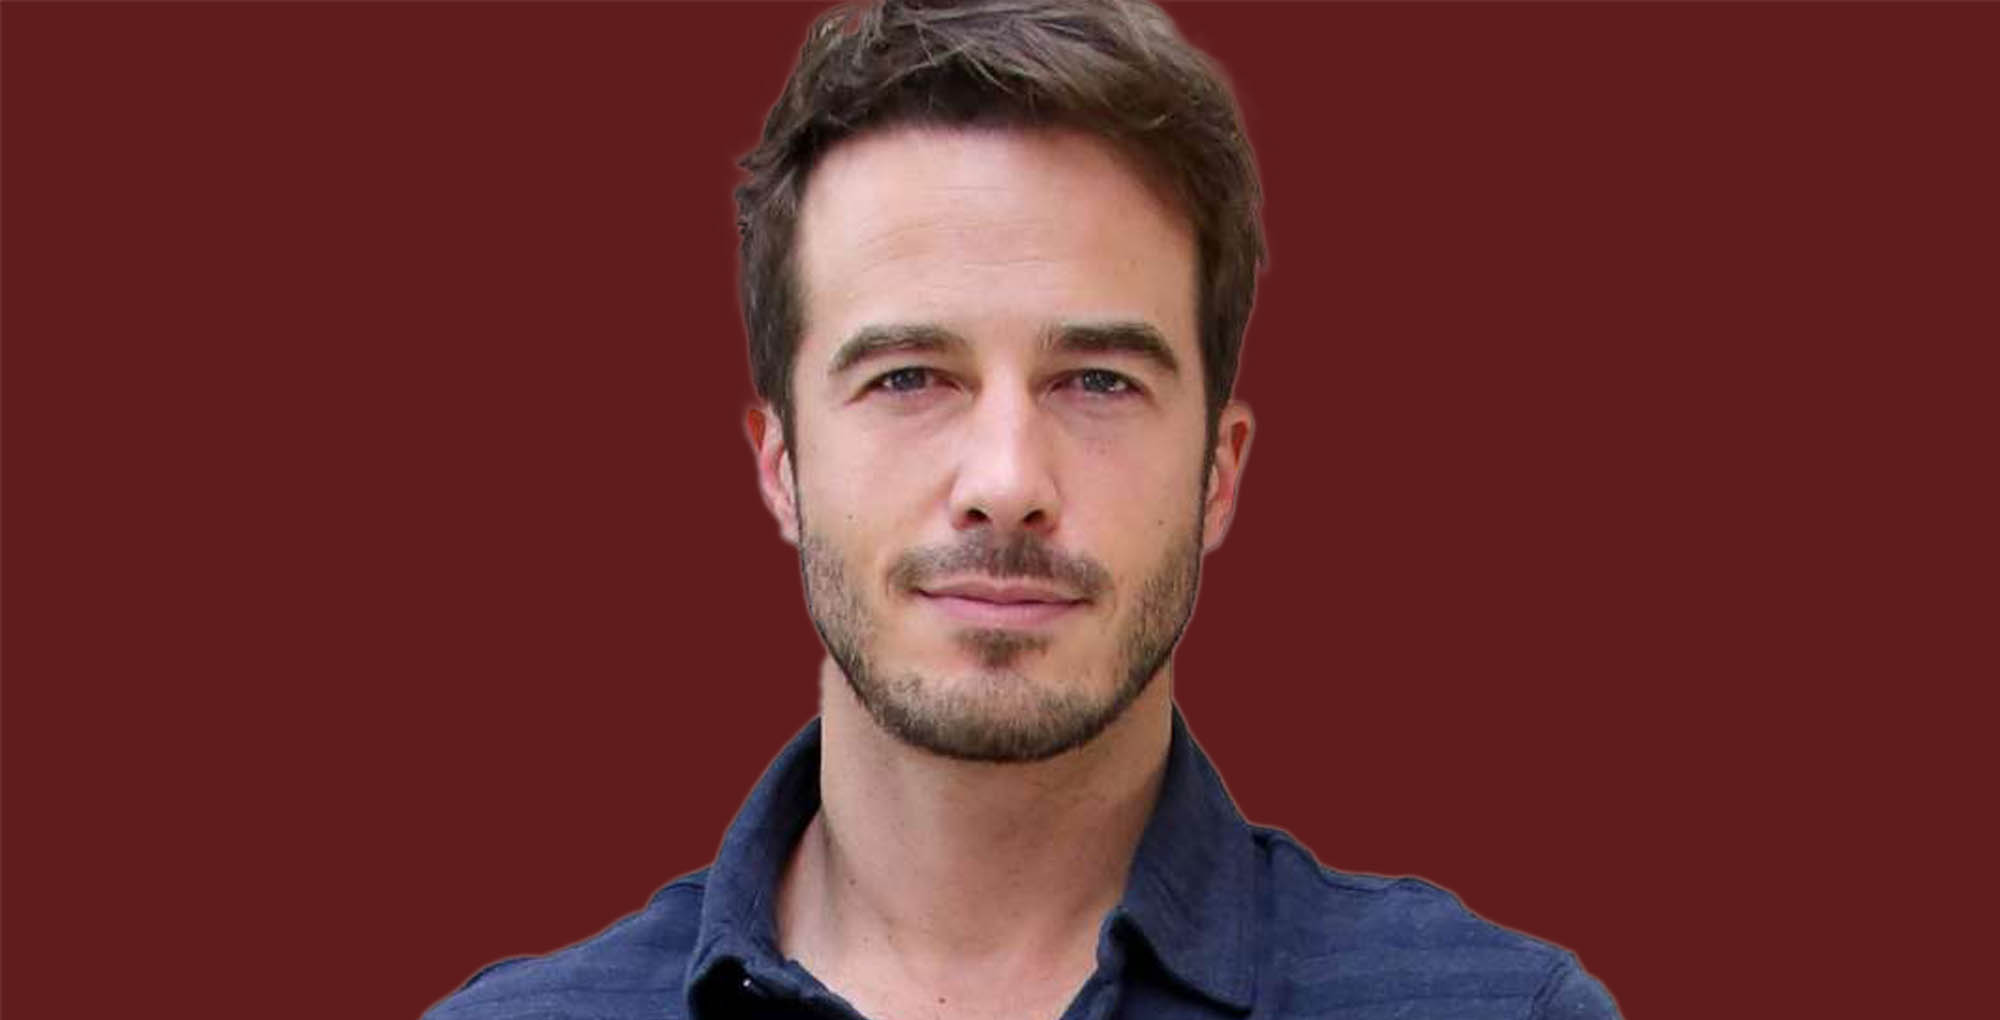 general hospital's ryan carnes wearing a blue collared shirt on a red background.